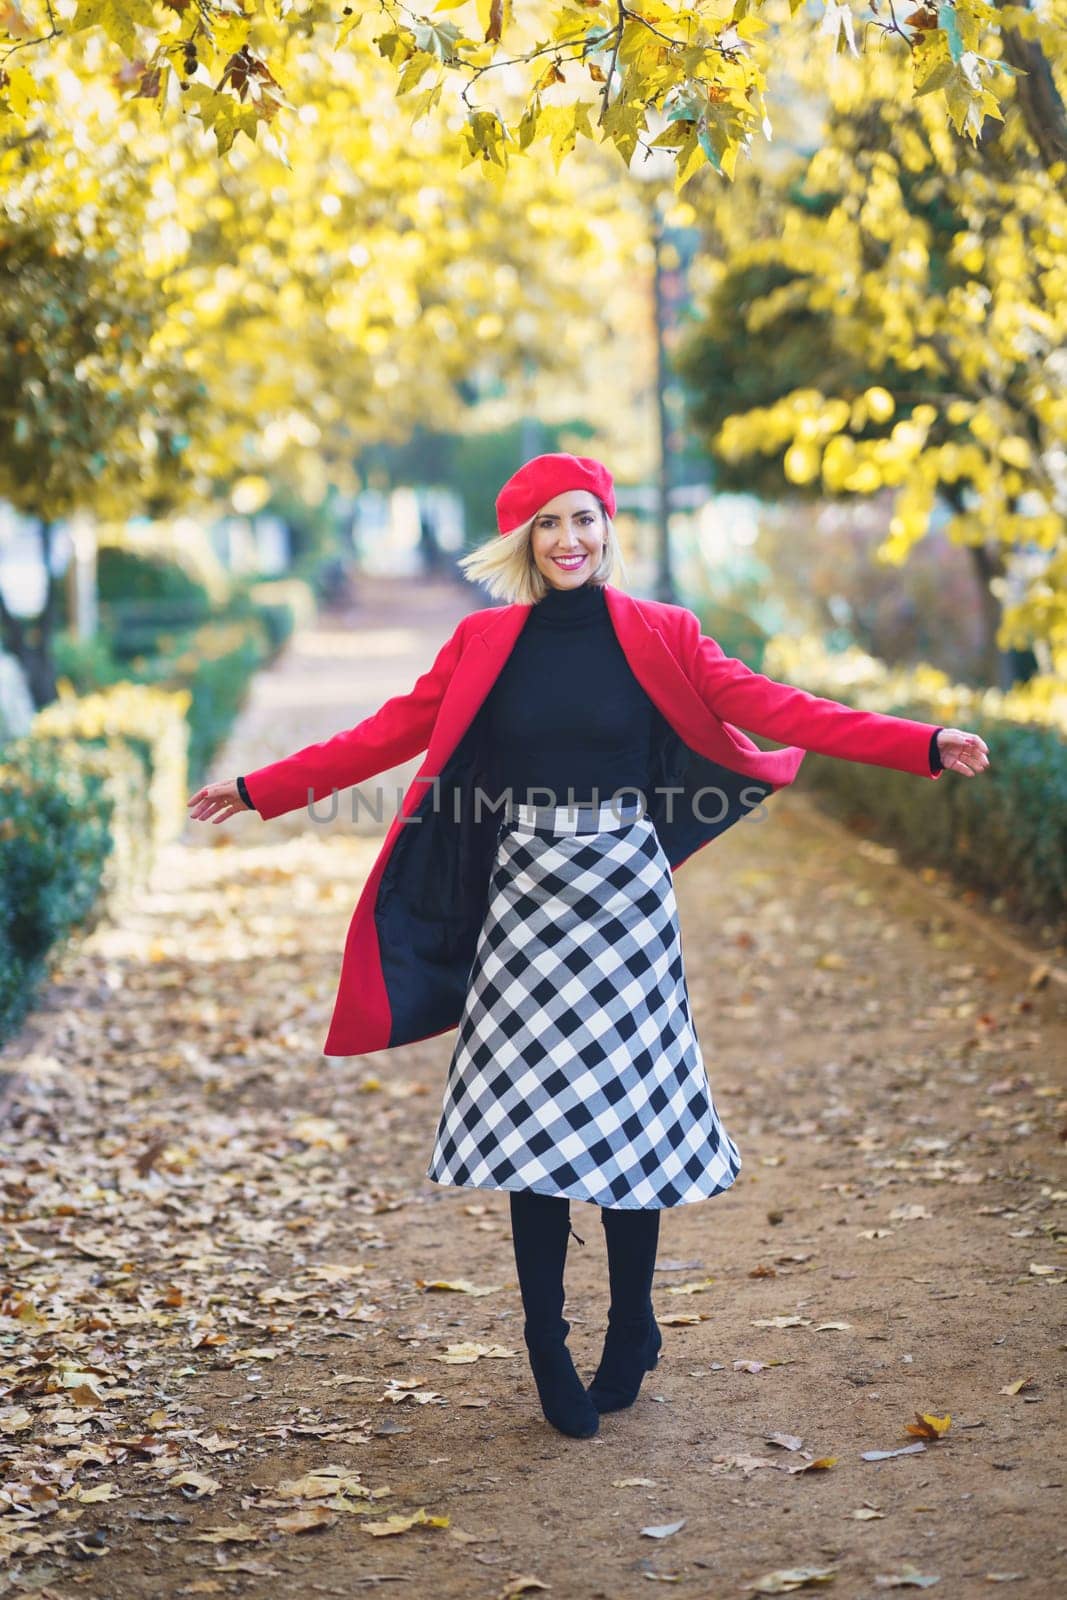 Full body of cheerful female in red coat and beret looking at camera while spinning around on walkway in autumn park